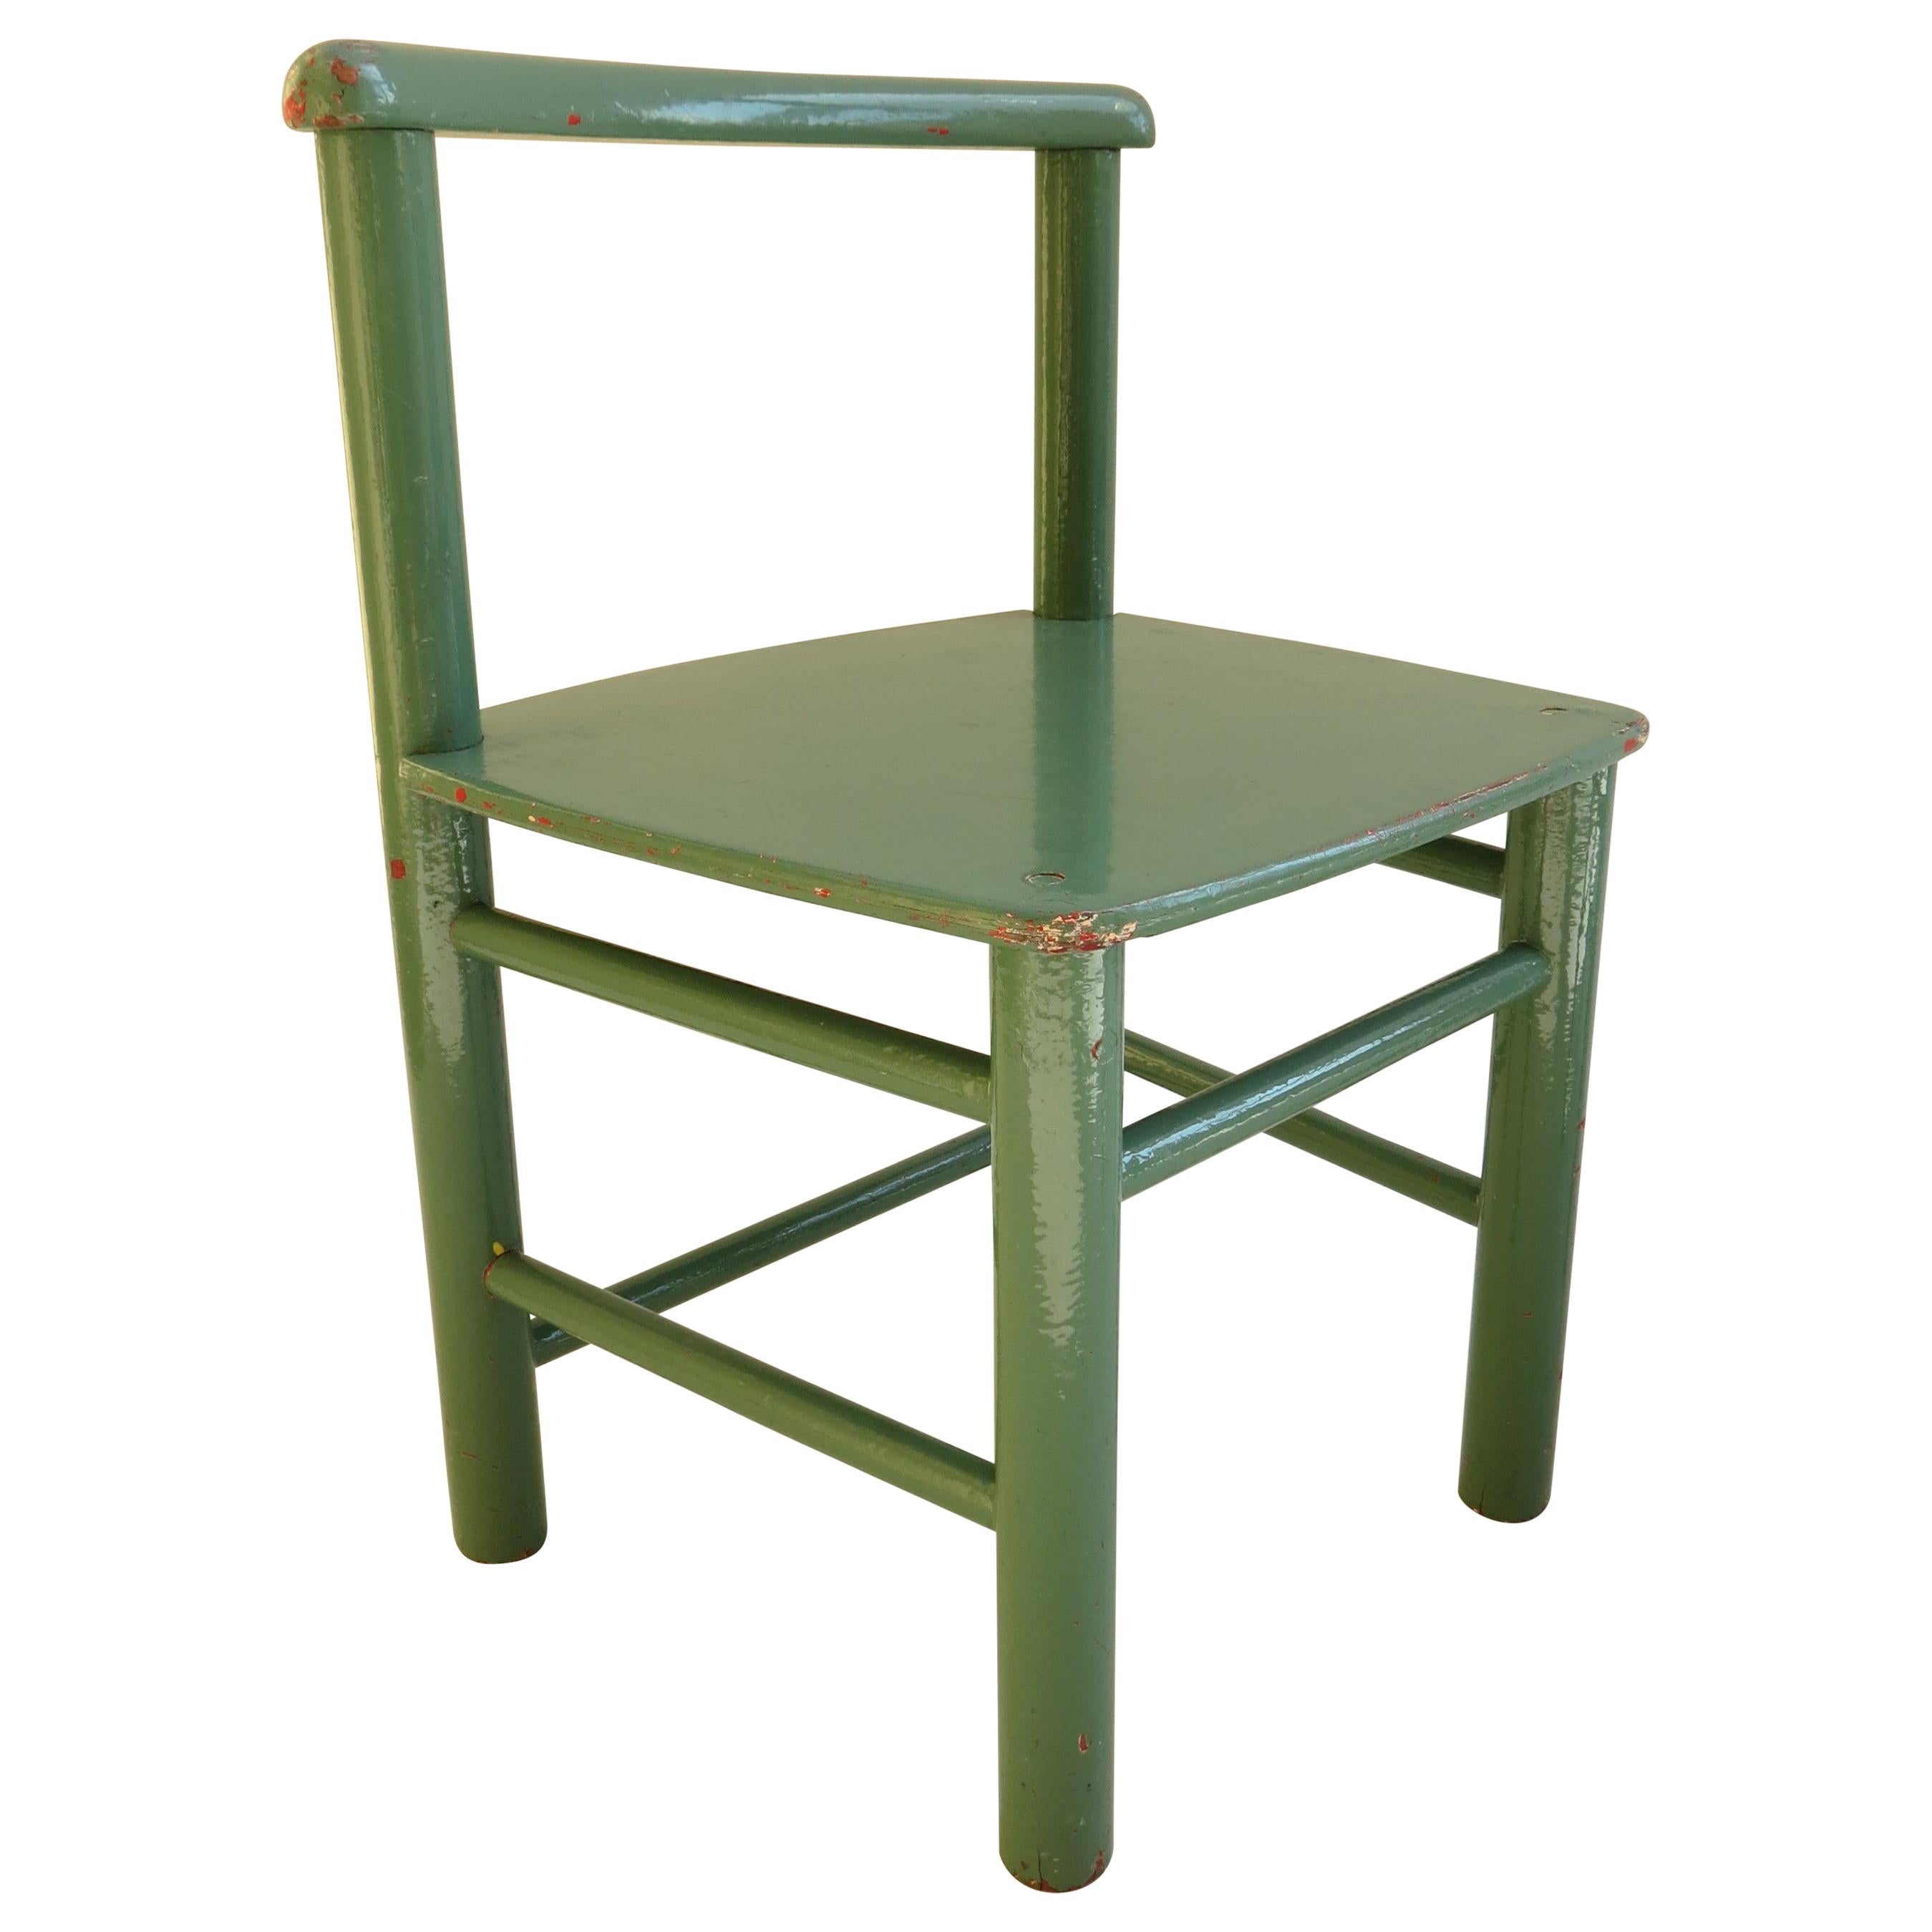 Pair of Scandinavian Childs Chairs in Green from the 1960s